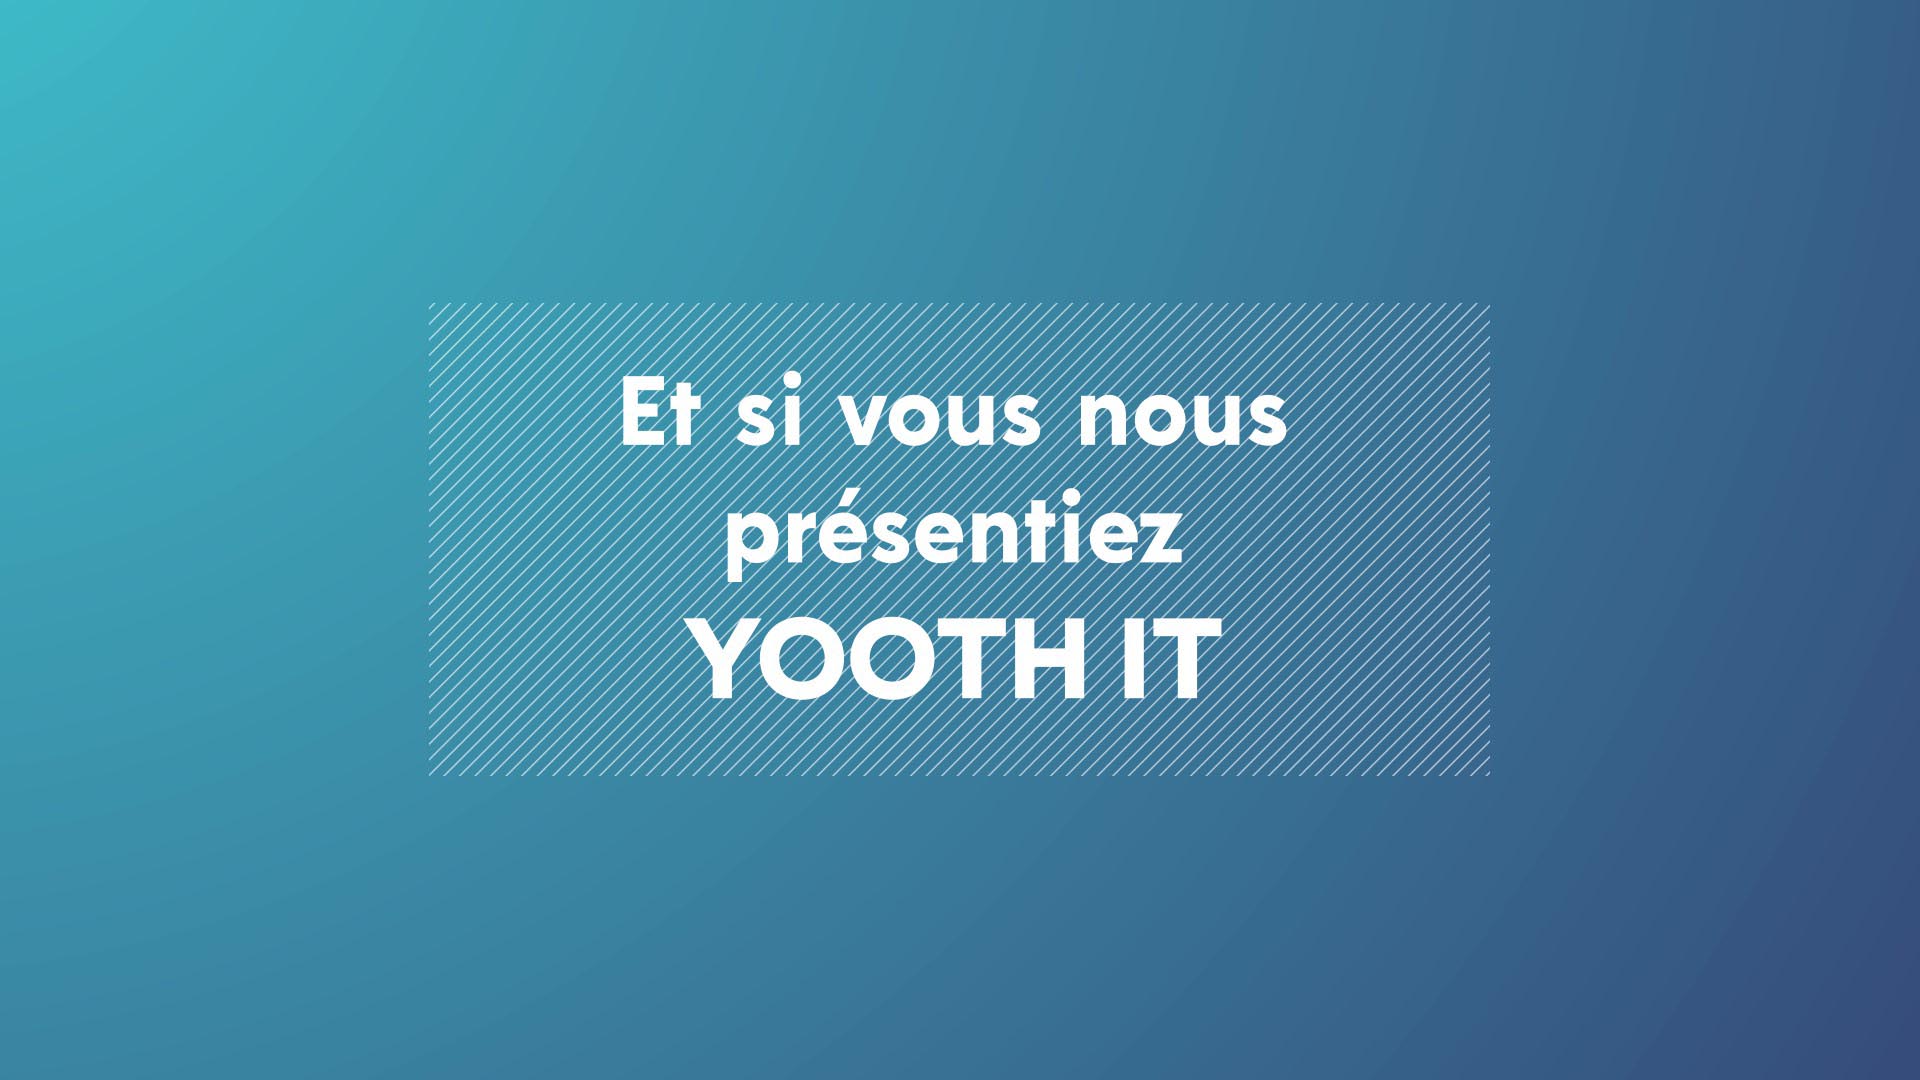 Yooth-IT